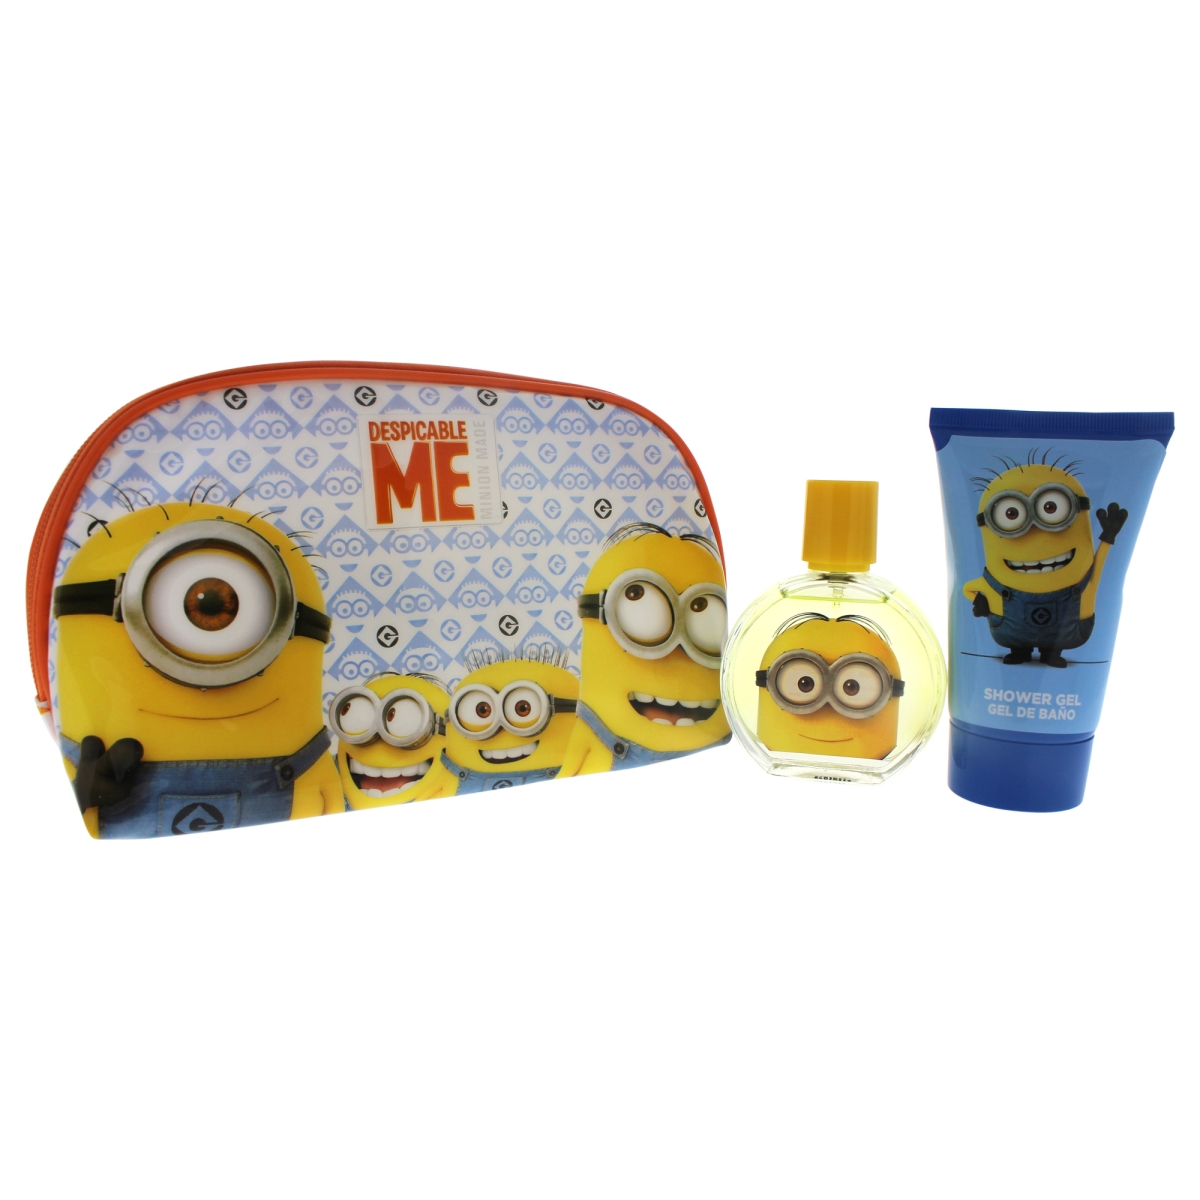 K-gs-2006 3 Piece Gift Set For Kids